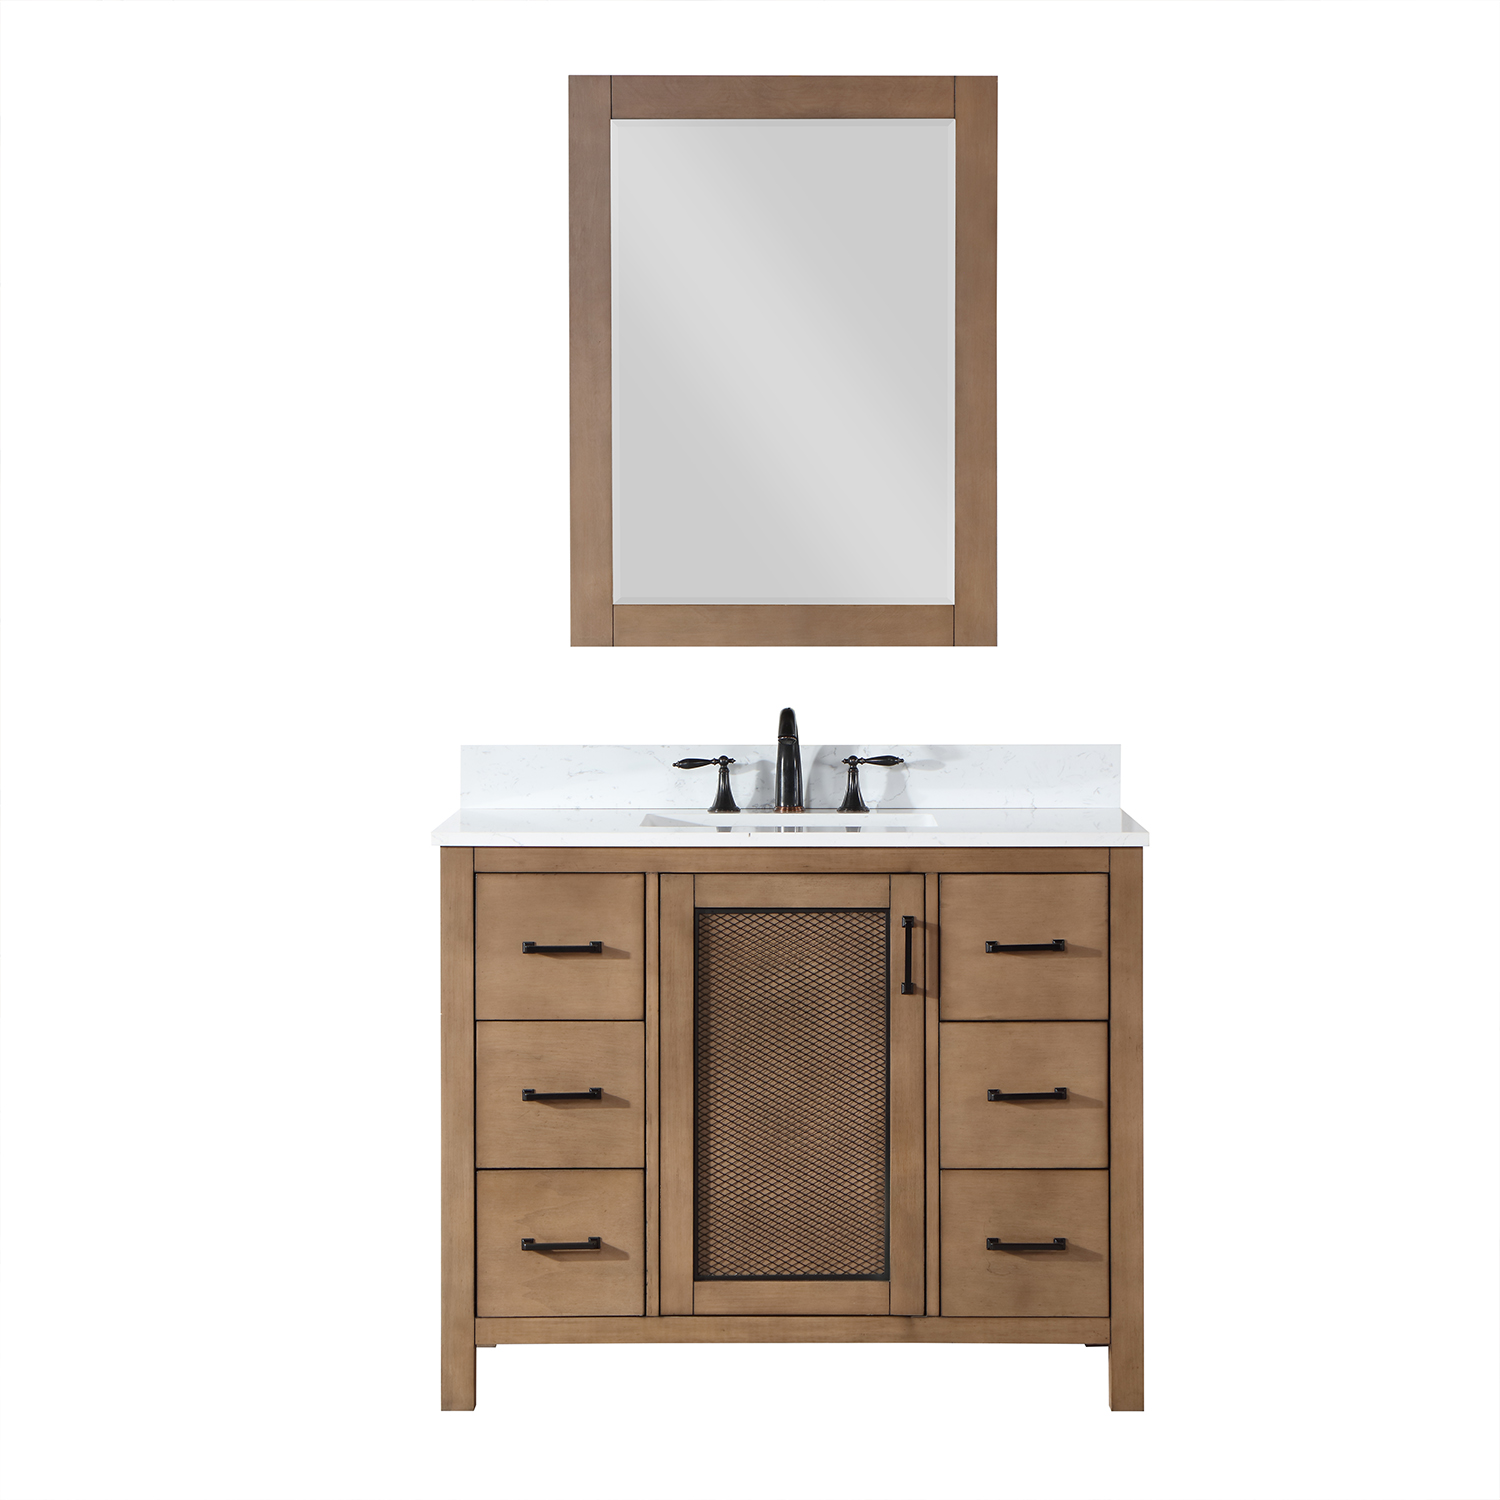 Issac Edwards Collection 42" Single Bathroom Vanity Set in Brown Pine with Carrara White Composite Stone Countertop without Mirror 